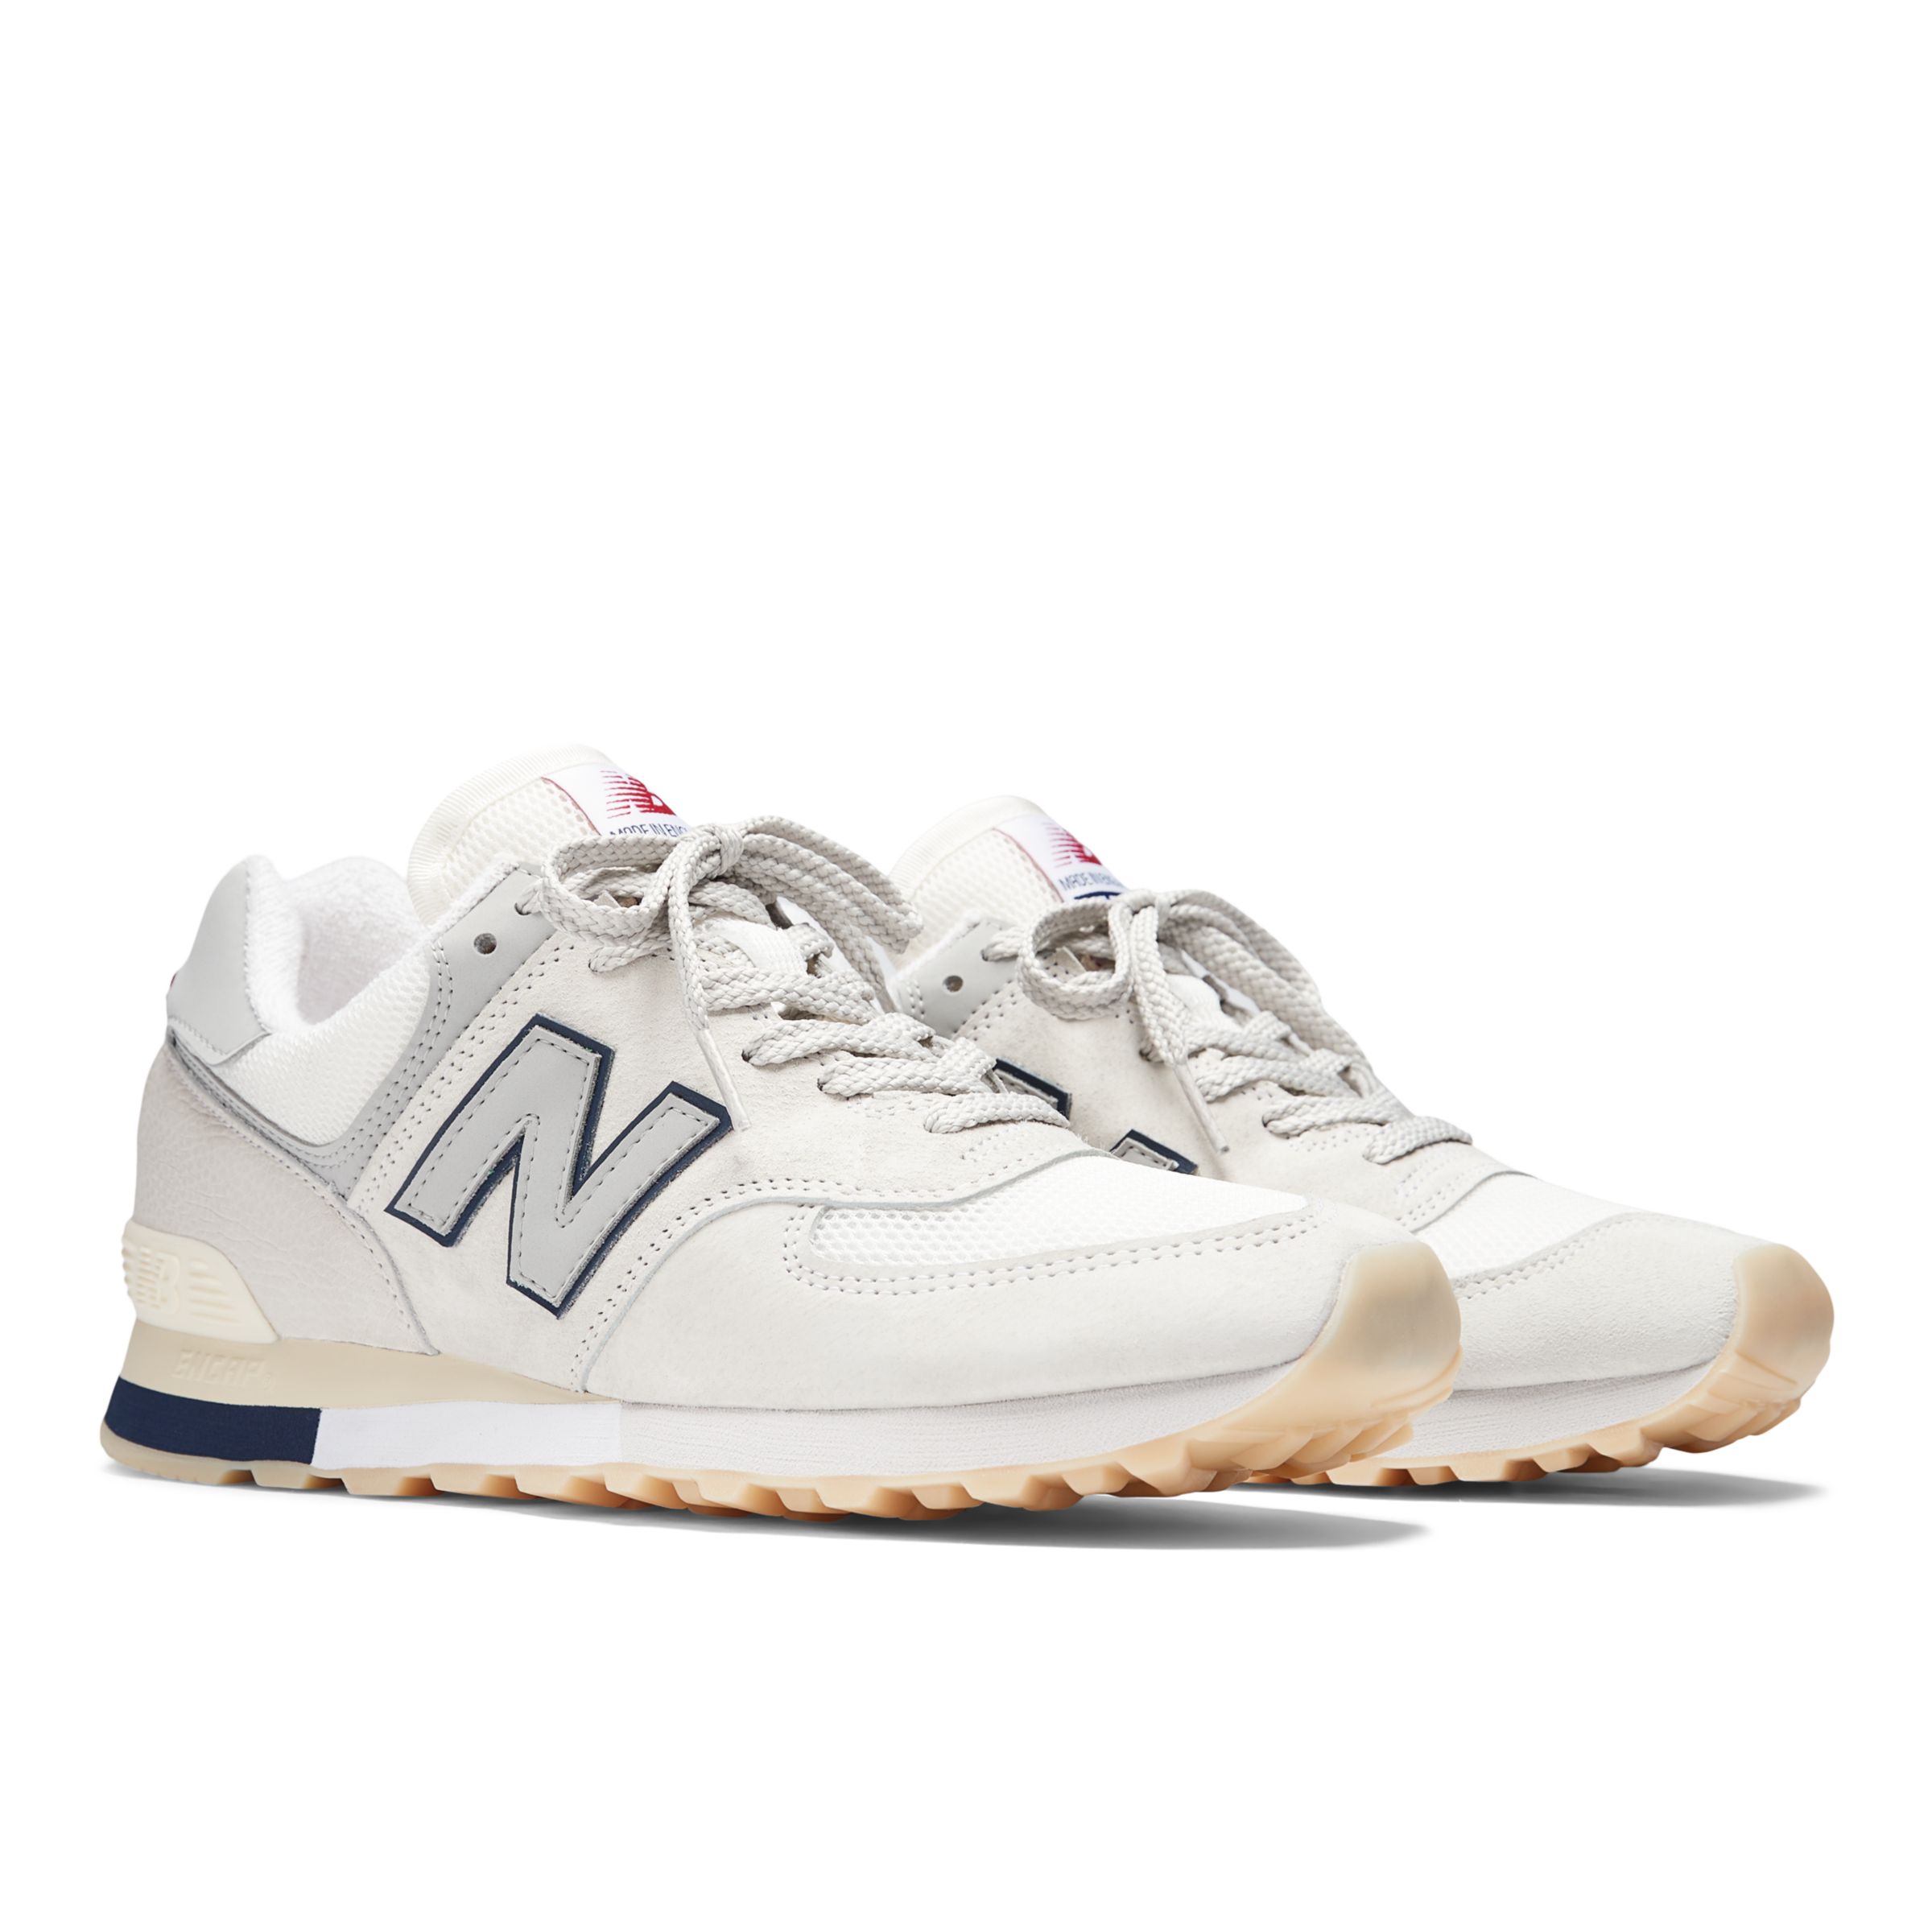 New Balance unisex Made in UK 576 Vintage Sport Sneakers - White/Red/Blue (Size 10)